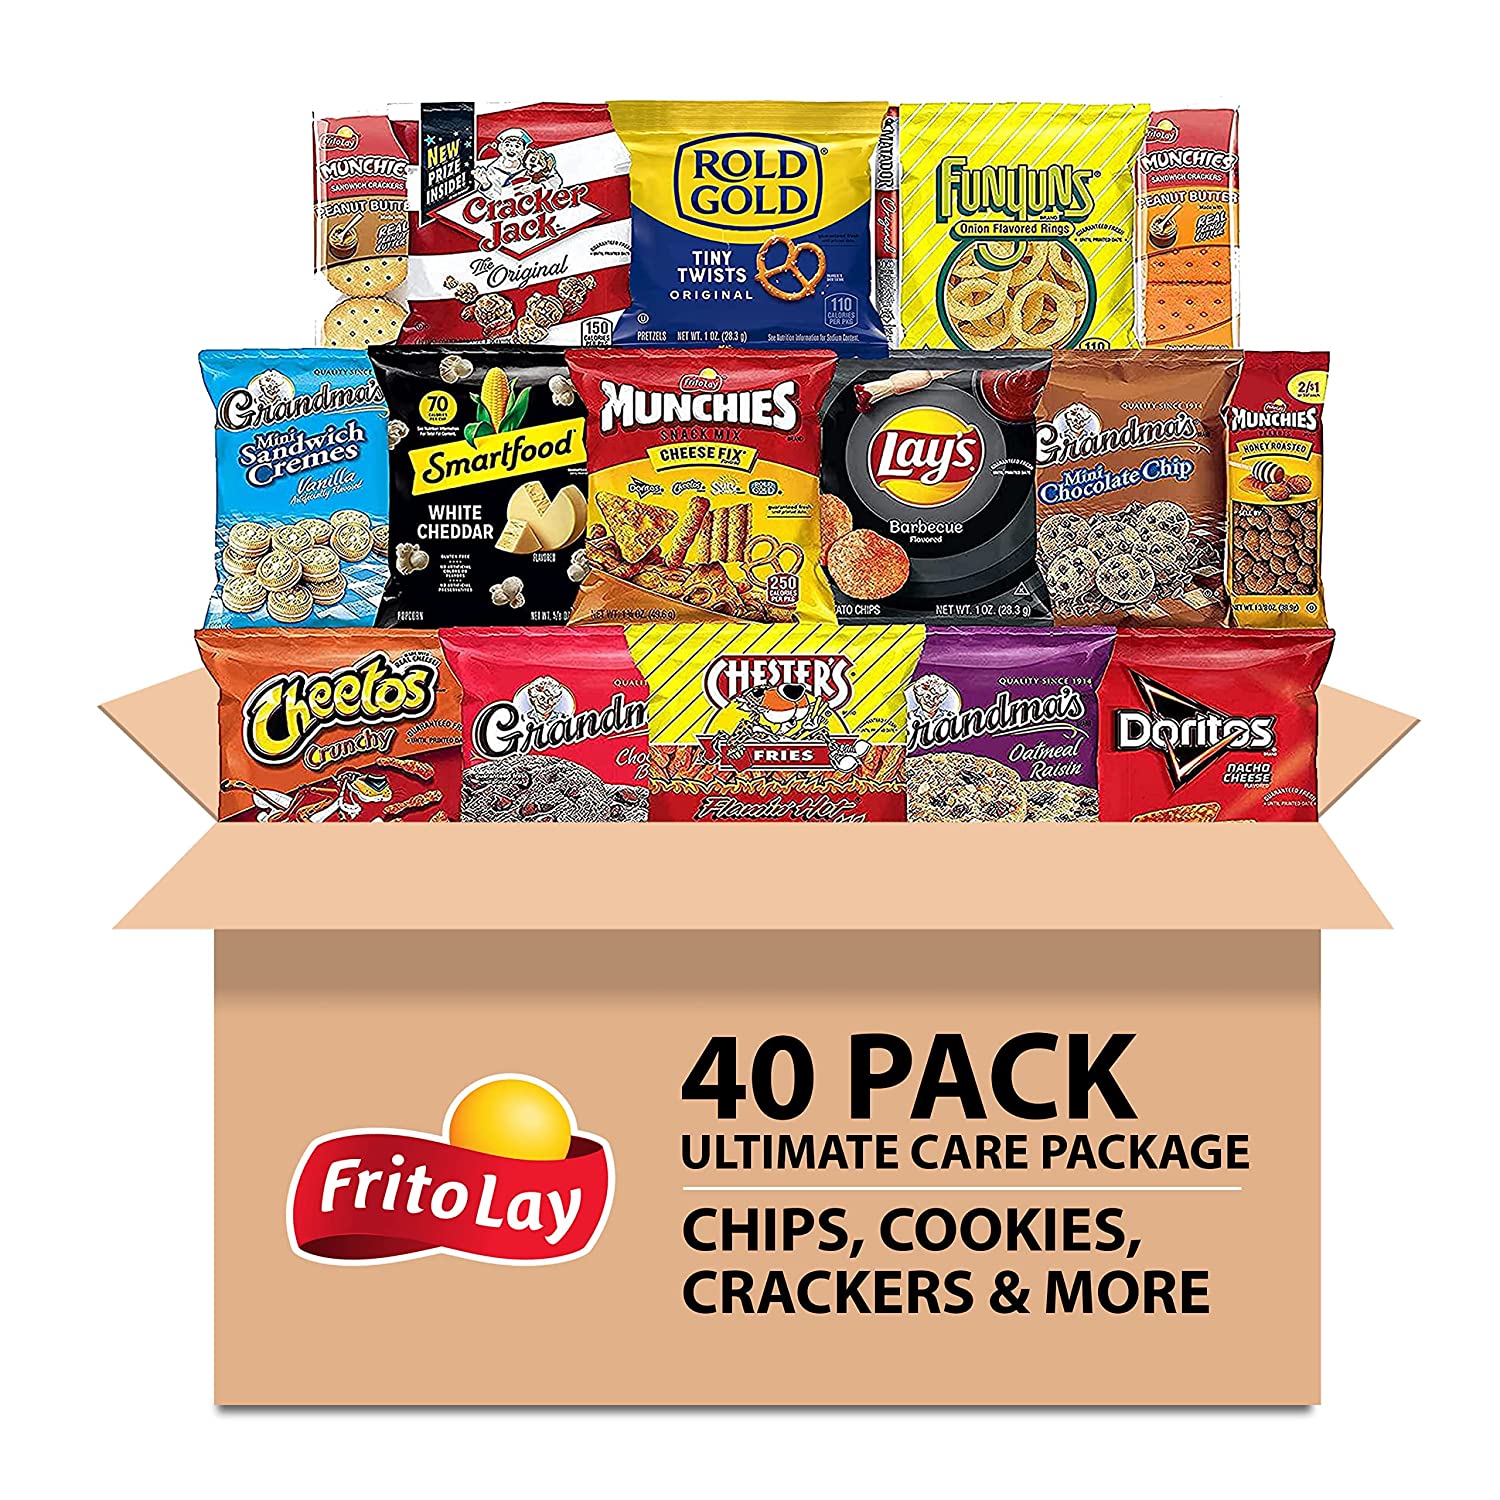 Frito-Lay Ultimate Snack Care Package, Variety Assortment of Chips, Cookies, Crackers & More, 40 Count~$12.95 @ Amazon~Free Prime Shipping!